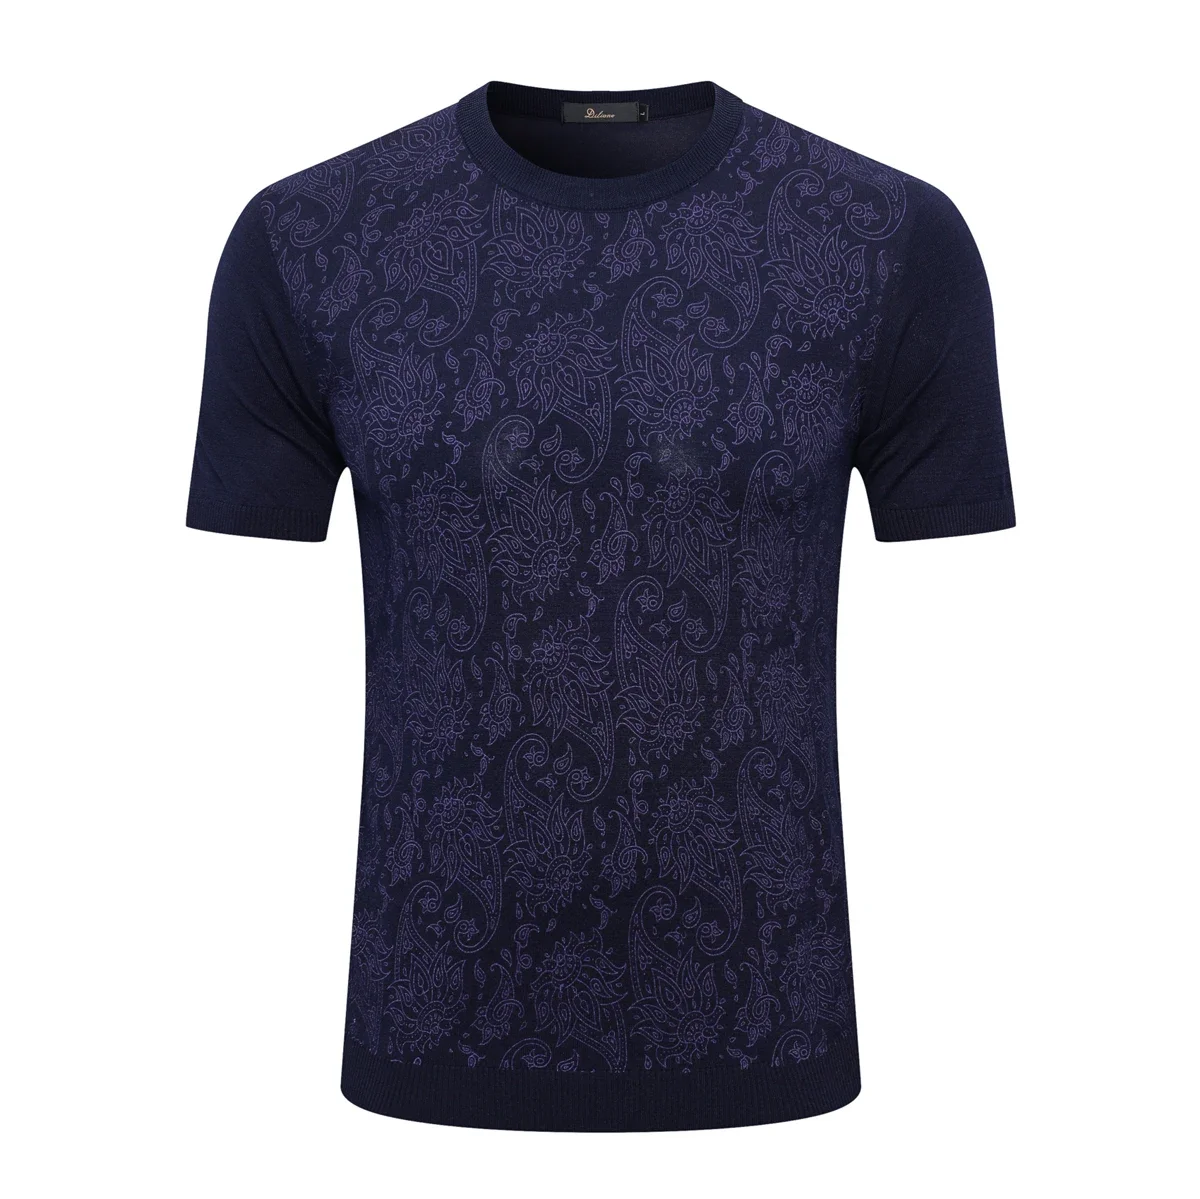 

OECHSLI T-shirt Silk 2025 New Men's short Sleeve Breathable Elastic and Print pattern Suitable for gentleman Big Size M-5XL